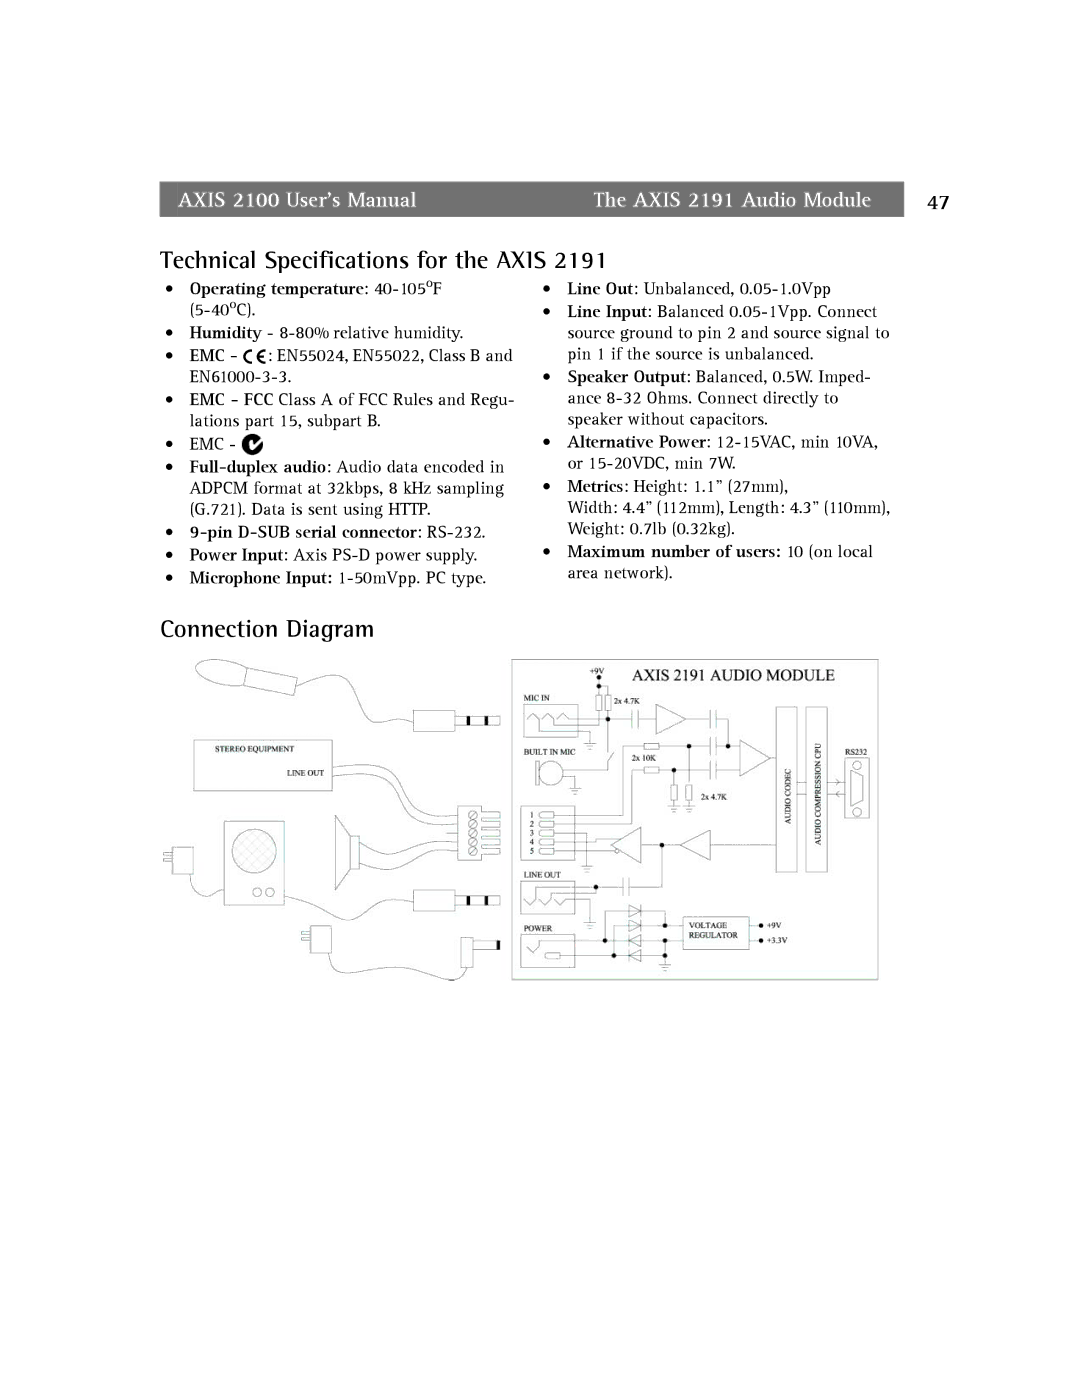 Axis Communications 2100 manual Technical Specifications for the Axis, Connection Diagram 